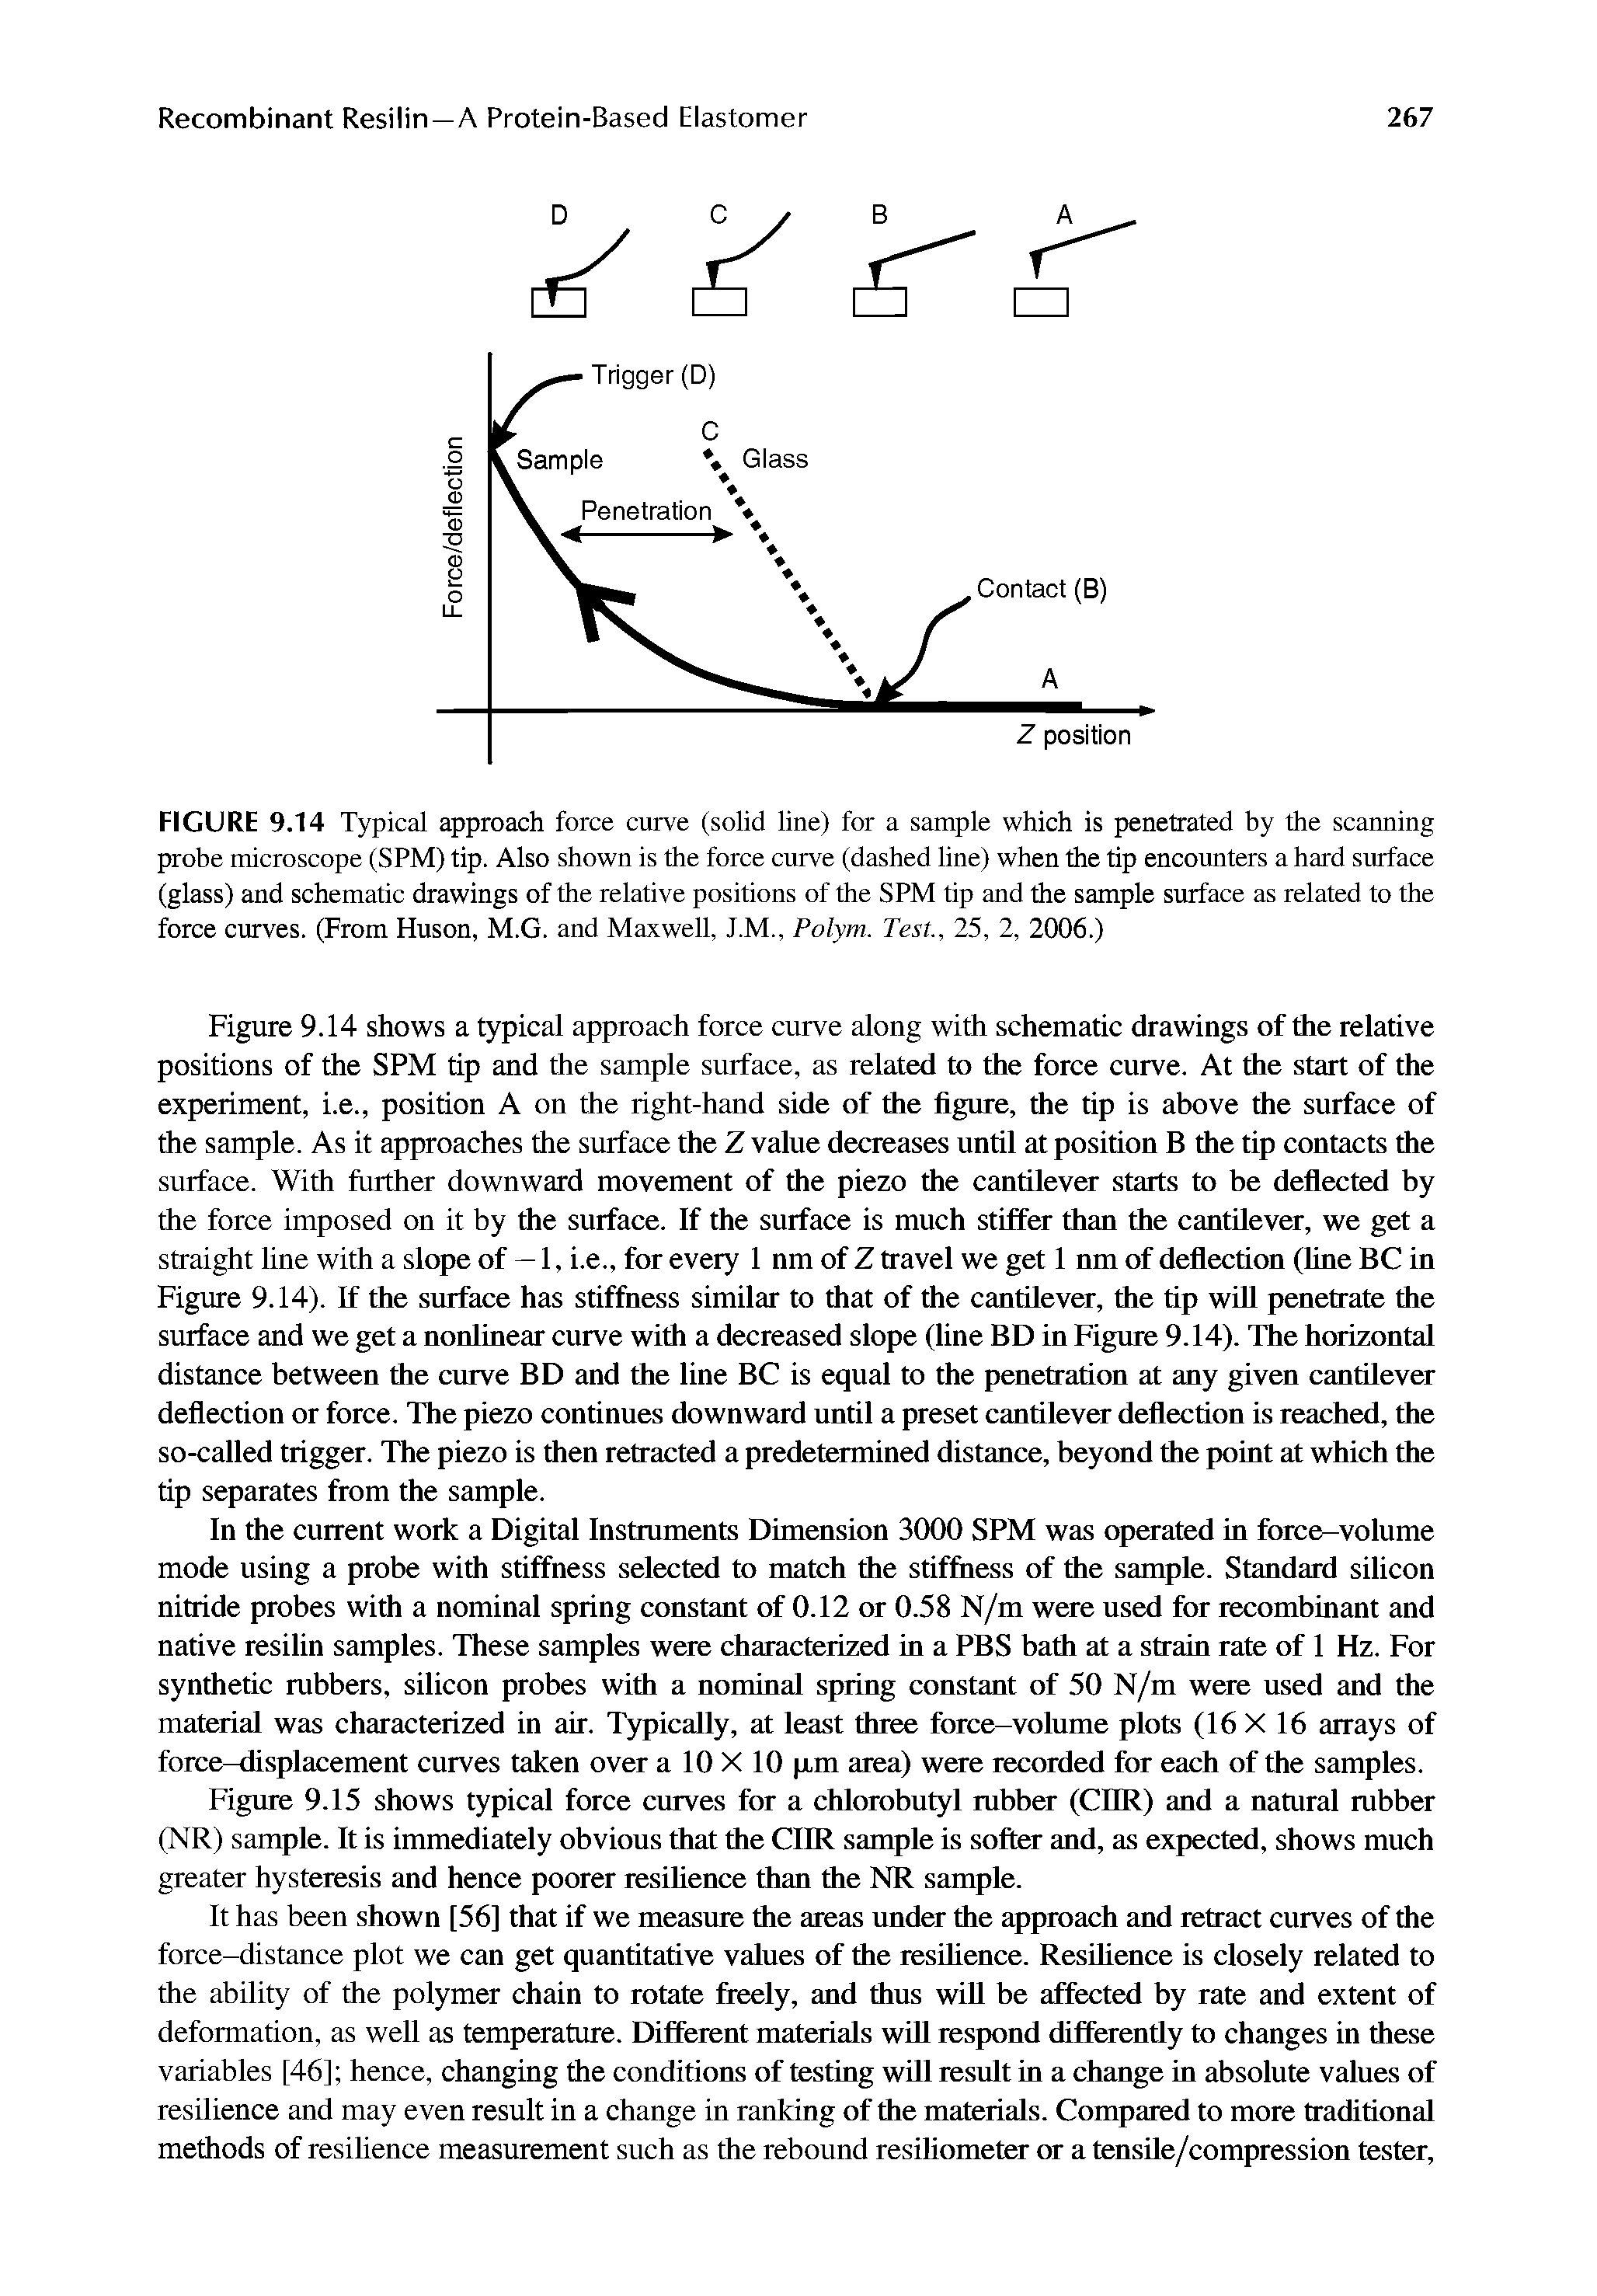 Figure 9.14 shows a typical approach force curve along with schematic drawings of the relative positions of the SPM tip and the sample surface, as related to the force curve. At the start of the experiment, i.e., position A on the right-hand side of the figure, the tip is above the surface of the sample. As it approaches the surface the Z value decreases until at position B the tip contacts the surface. With further downward movement of the piezo the cantilever starts to be deflected by the force imposed on it by the surface. If the surface is much stiffer than the cantilever, we get a straight line with a slope of — 1, i.e., for every 1 nm of Z travel we get 1 nm of deflection (Une BC in Figure 9.14). If the surface has stiffness similar to that of the cantilever, the tip wUl penetrate the surface and we get a nonlinear curve with a decreased slope (line BD in Figure 9.14). The horizontal distance between the curve BD and the line BC is equal to the penetration at any given cantilever deflection or force. The piezo continues downward until a preset cantilever deflection is reached, the so-called trigger. The piezo is then retracted a predetermined distance, beyond the point at which the tip separates from the sample.